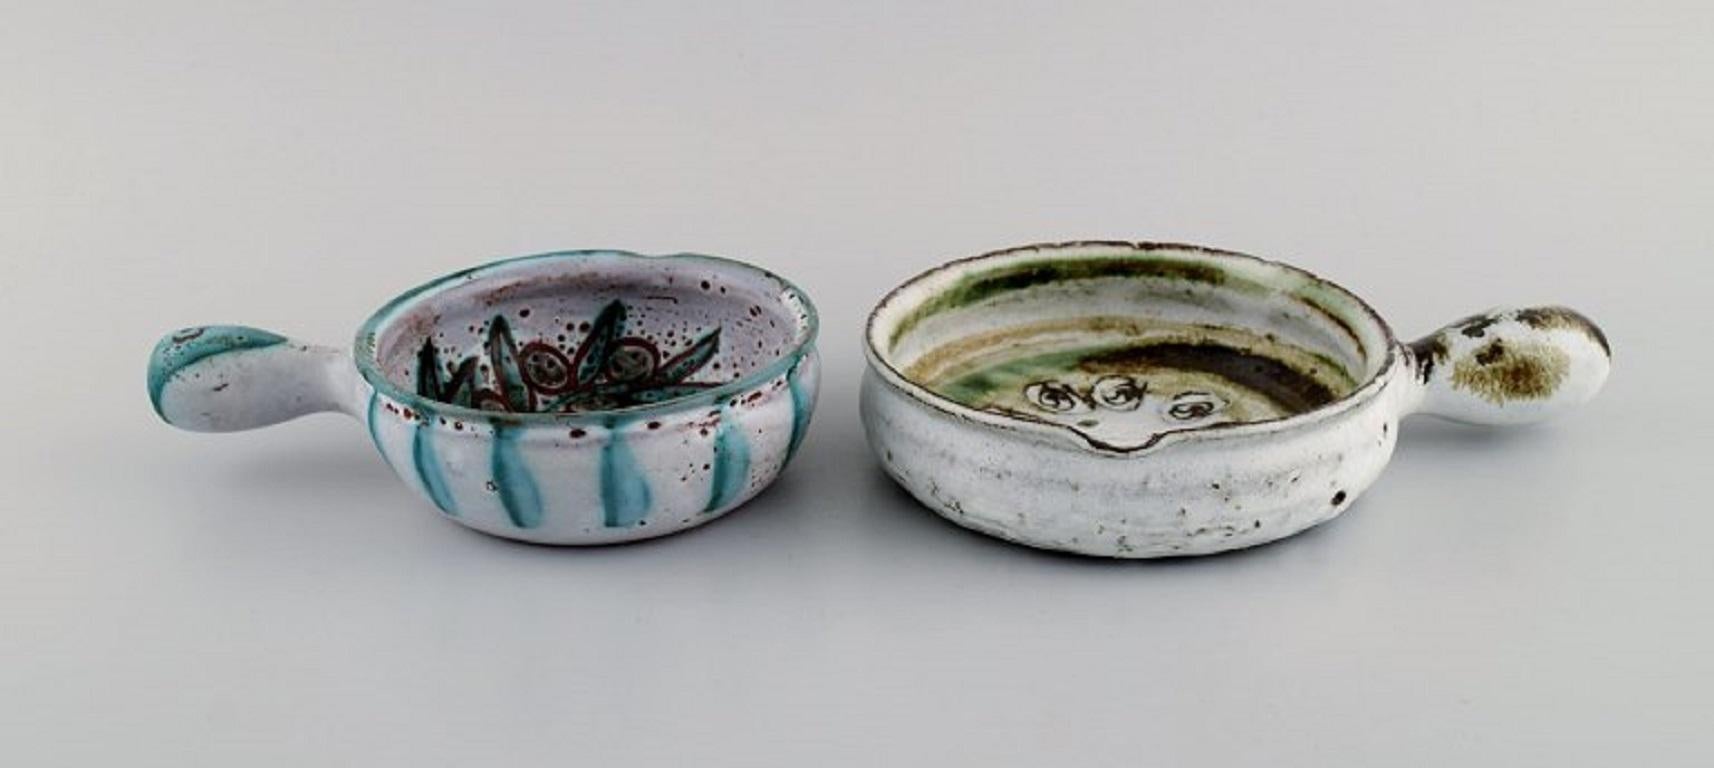 Bowl, lidded jar and three crème brûlée bowls with handles in hand-painted glazed stoneware. 
Belgium, 1960s / 70s.
The bowl measures: 19.5 x 5.2 cm.
The lidded jar measures: 14.5 x 11.5 cm.
Largest crème brûlée bowl: 24 x 17 x 5.5 cm.
In